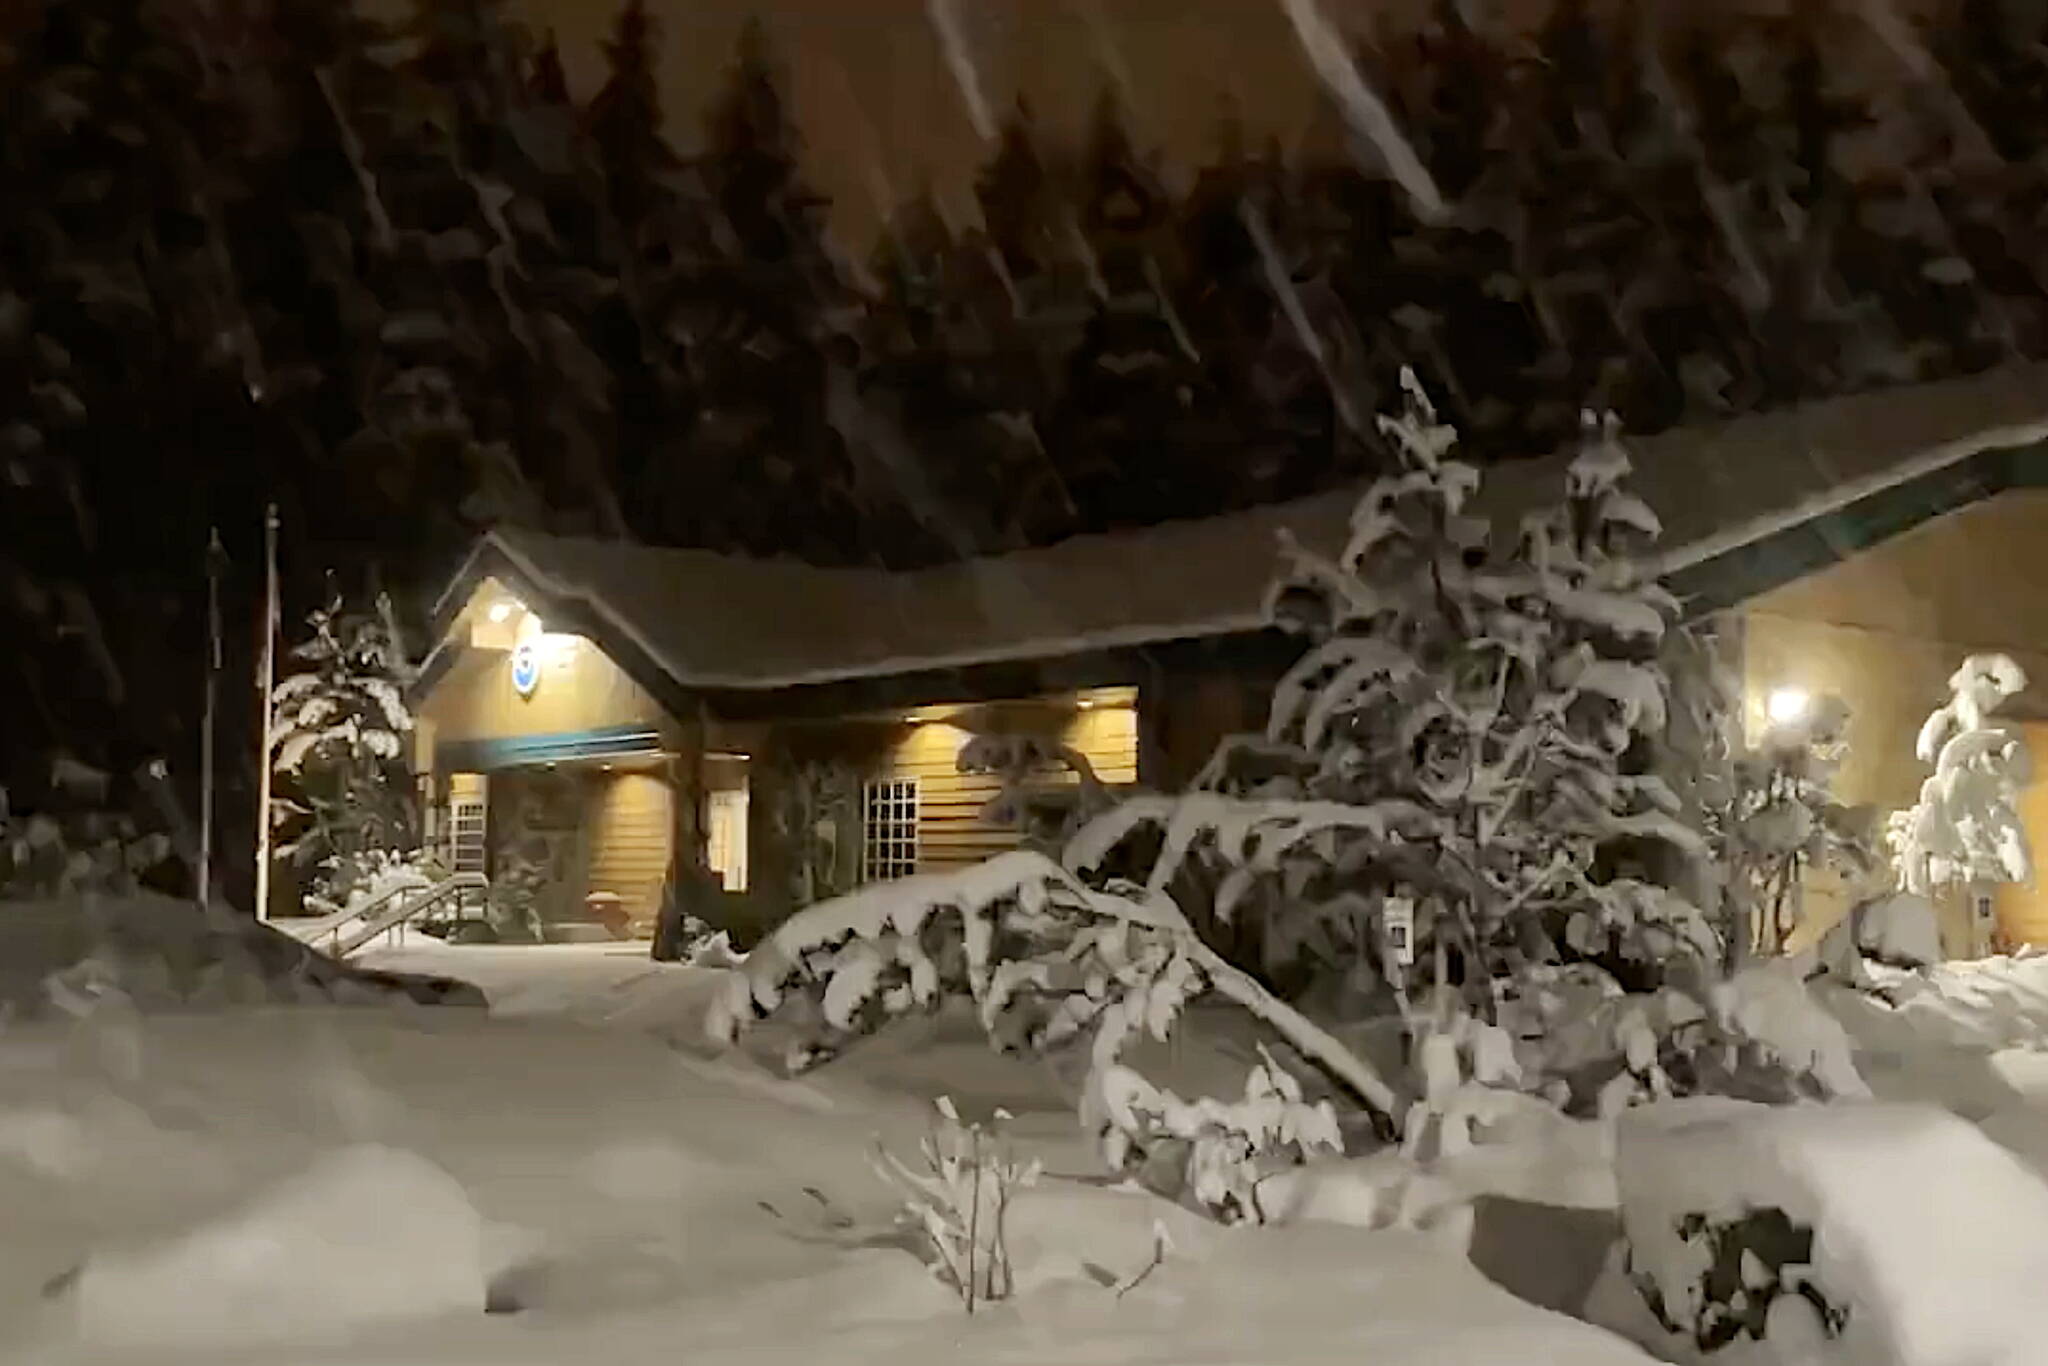 The National Weather Service Juneau station has received more than 10 inches of snow as of 6 a.m Thursday from a storm that started Wednesday afternoon. (Screenshot from video by NWS Juneau)